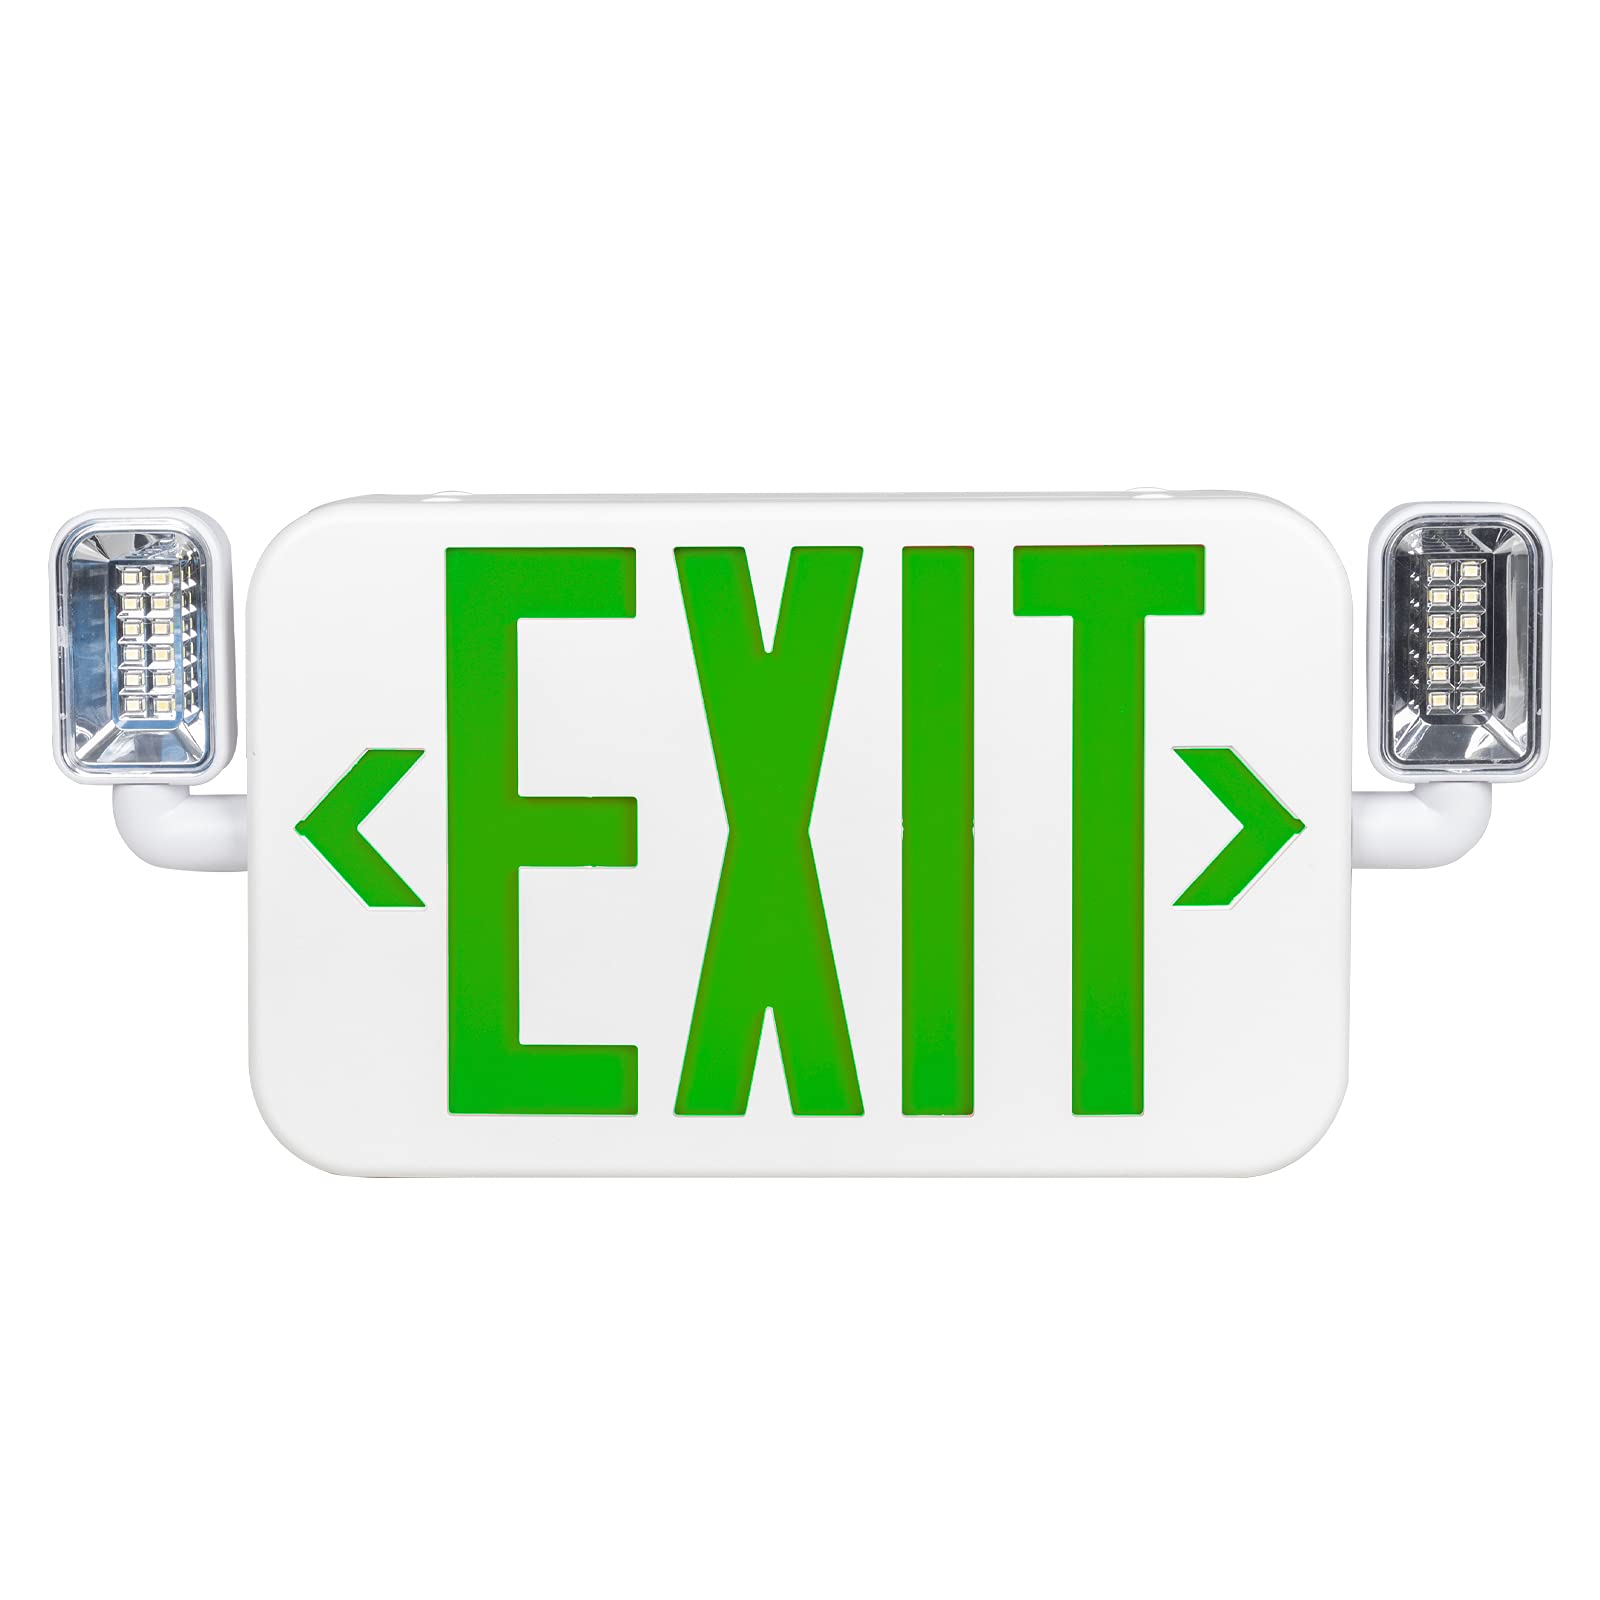 Ciata Ultra Slim Rechargeable Indoor Exit/Emergency Combo Sign Fixture with Battery powered Backup